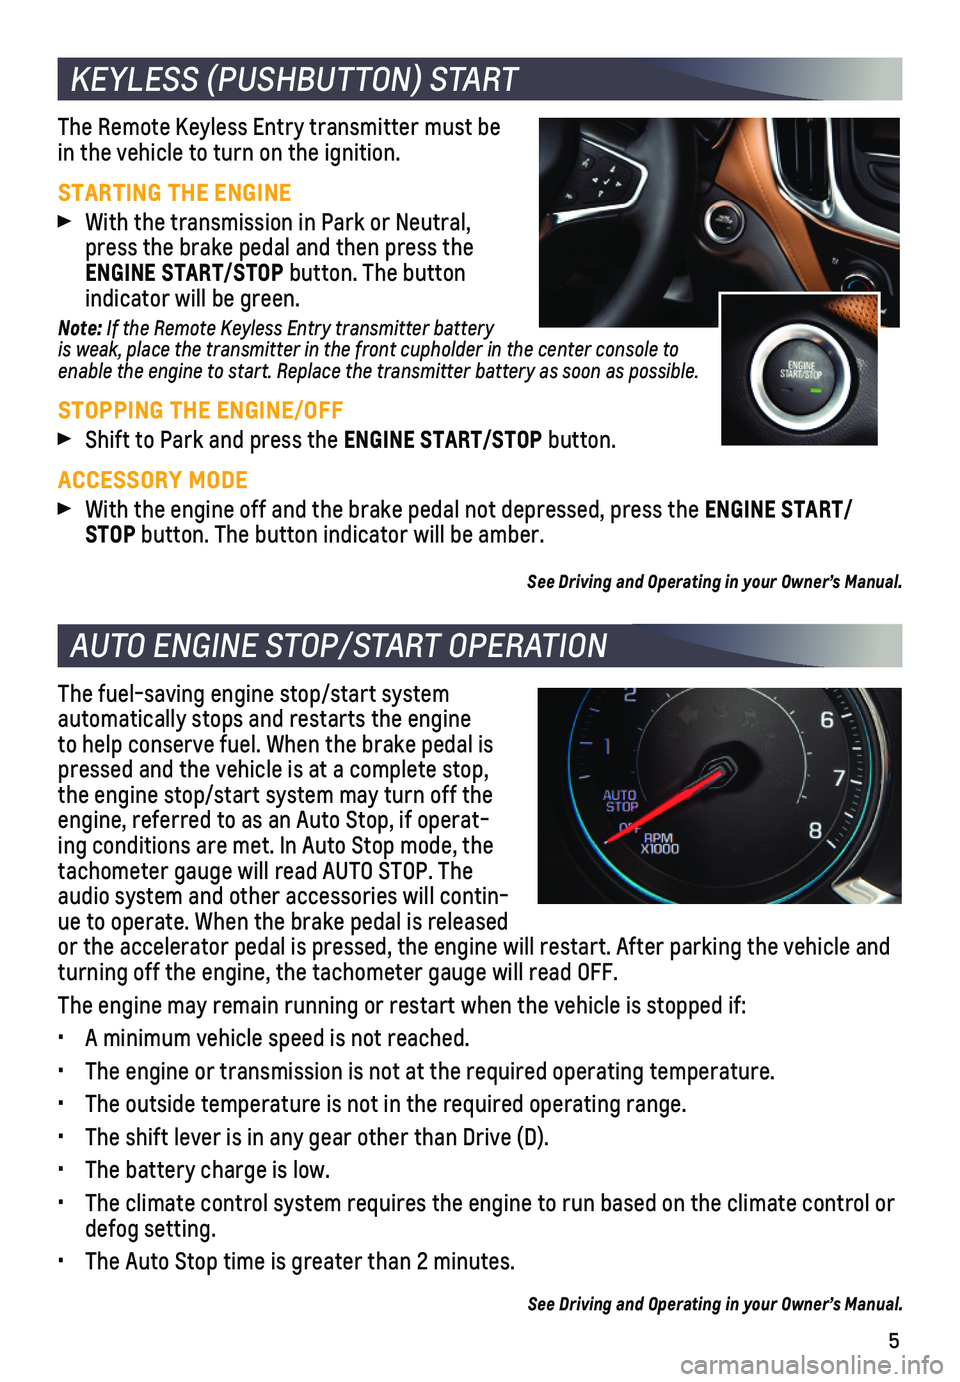 CHEVROLET EQUINOX 2019  Get To Know Guide 5
The Remote Keyless Entry transmitter must be in the vehicle to turn on the ignition.
STARTING THE ENGINE With the transmission in Park or Neutral, press the brake pedal and then press the ENGINE STA